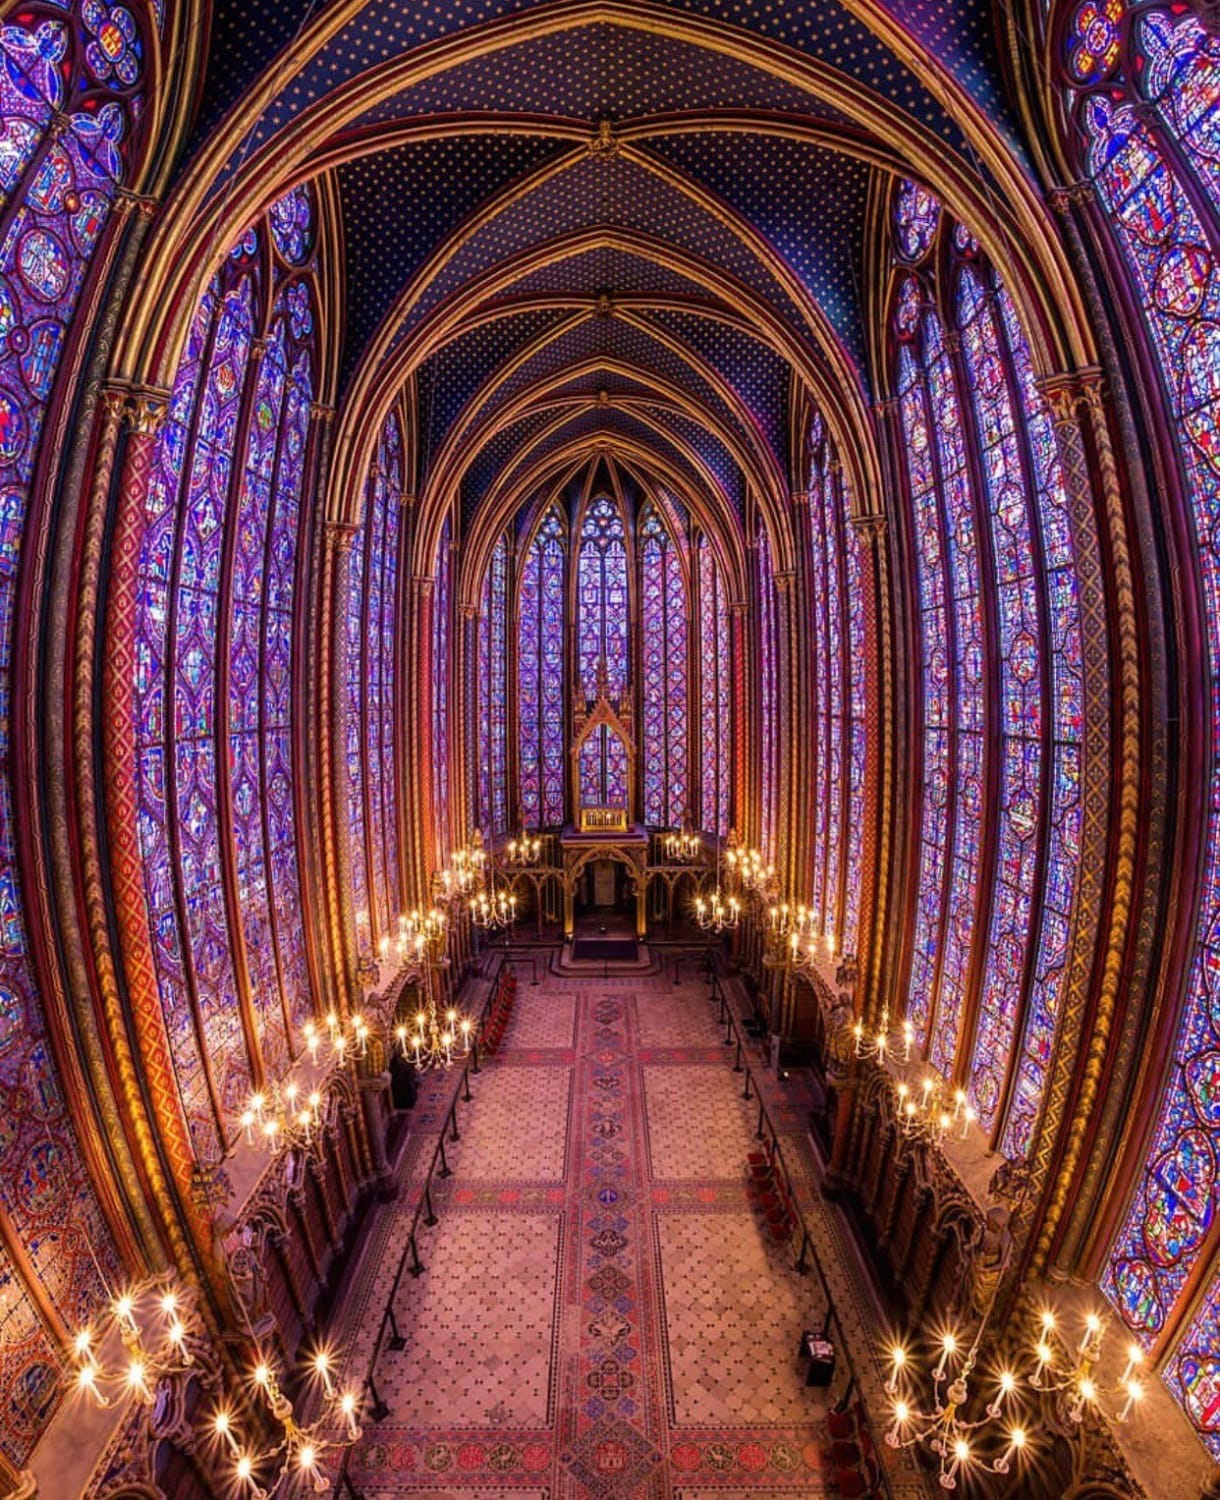 Hall and stained glass windows inside Sainte-Chapelle in Paris, completed in 1248